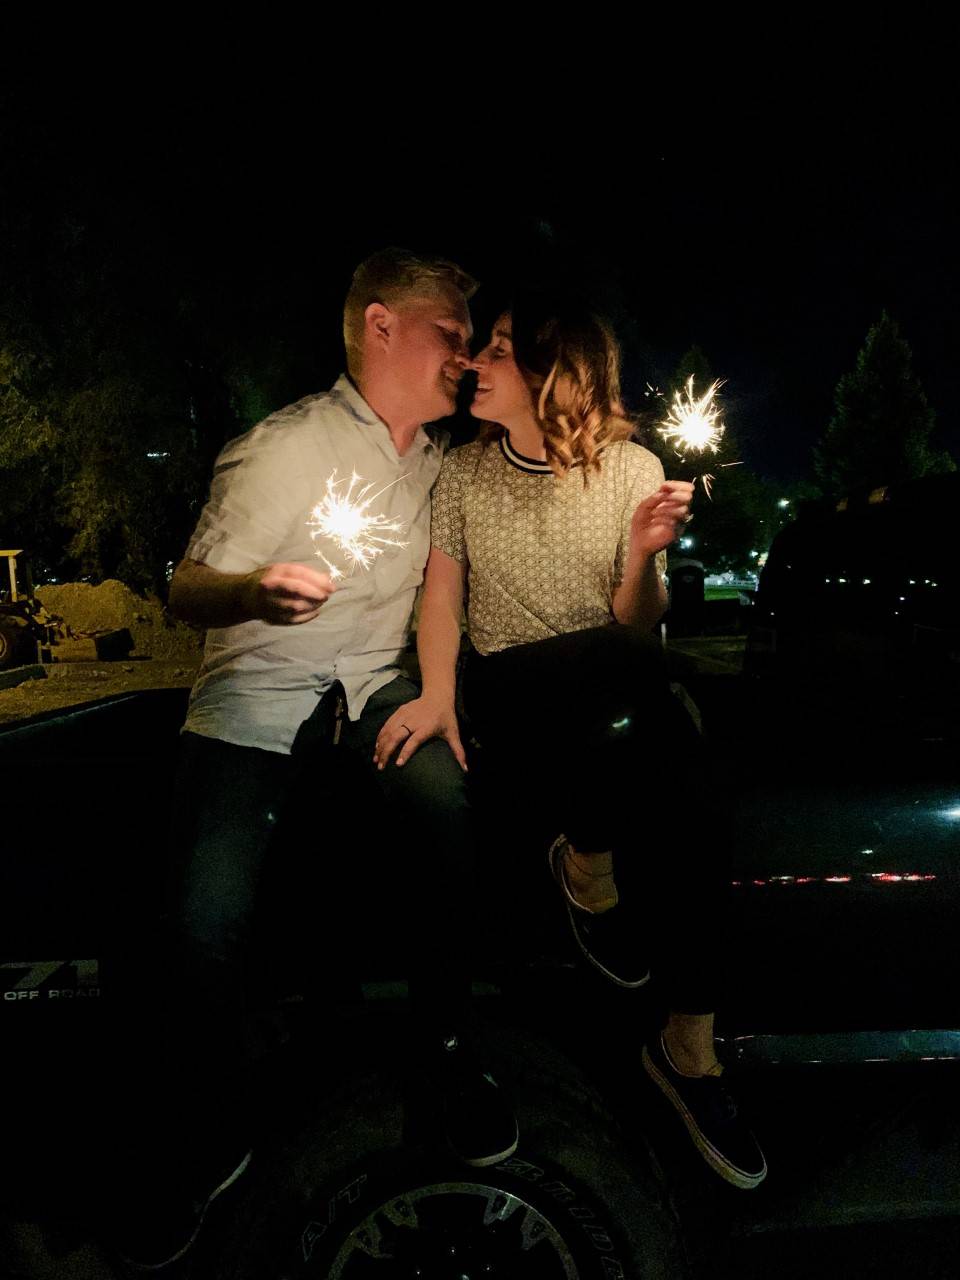 Henne Engagement Ring Couple Ethan & Maddie Share a Kiss Holding Sparklers